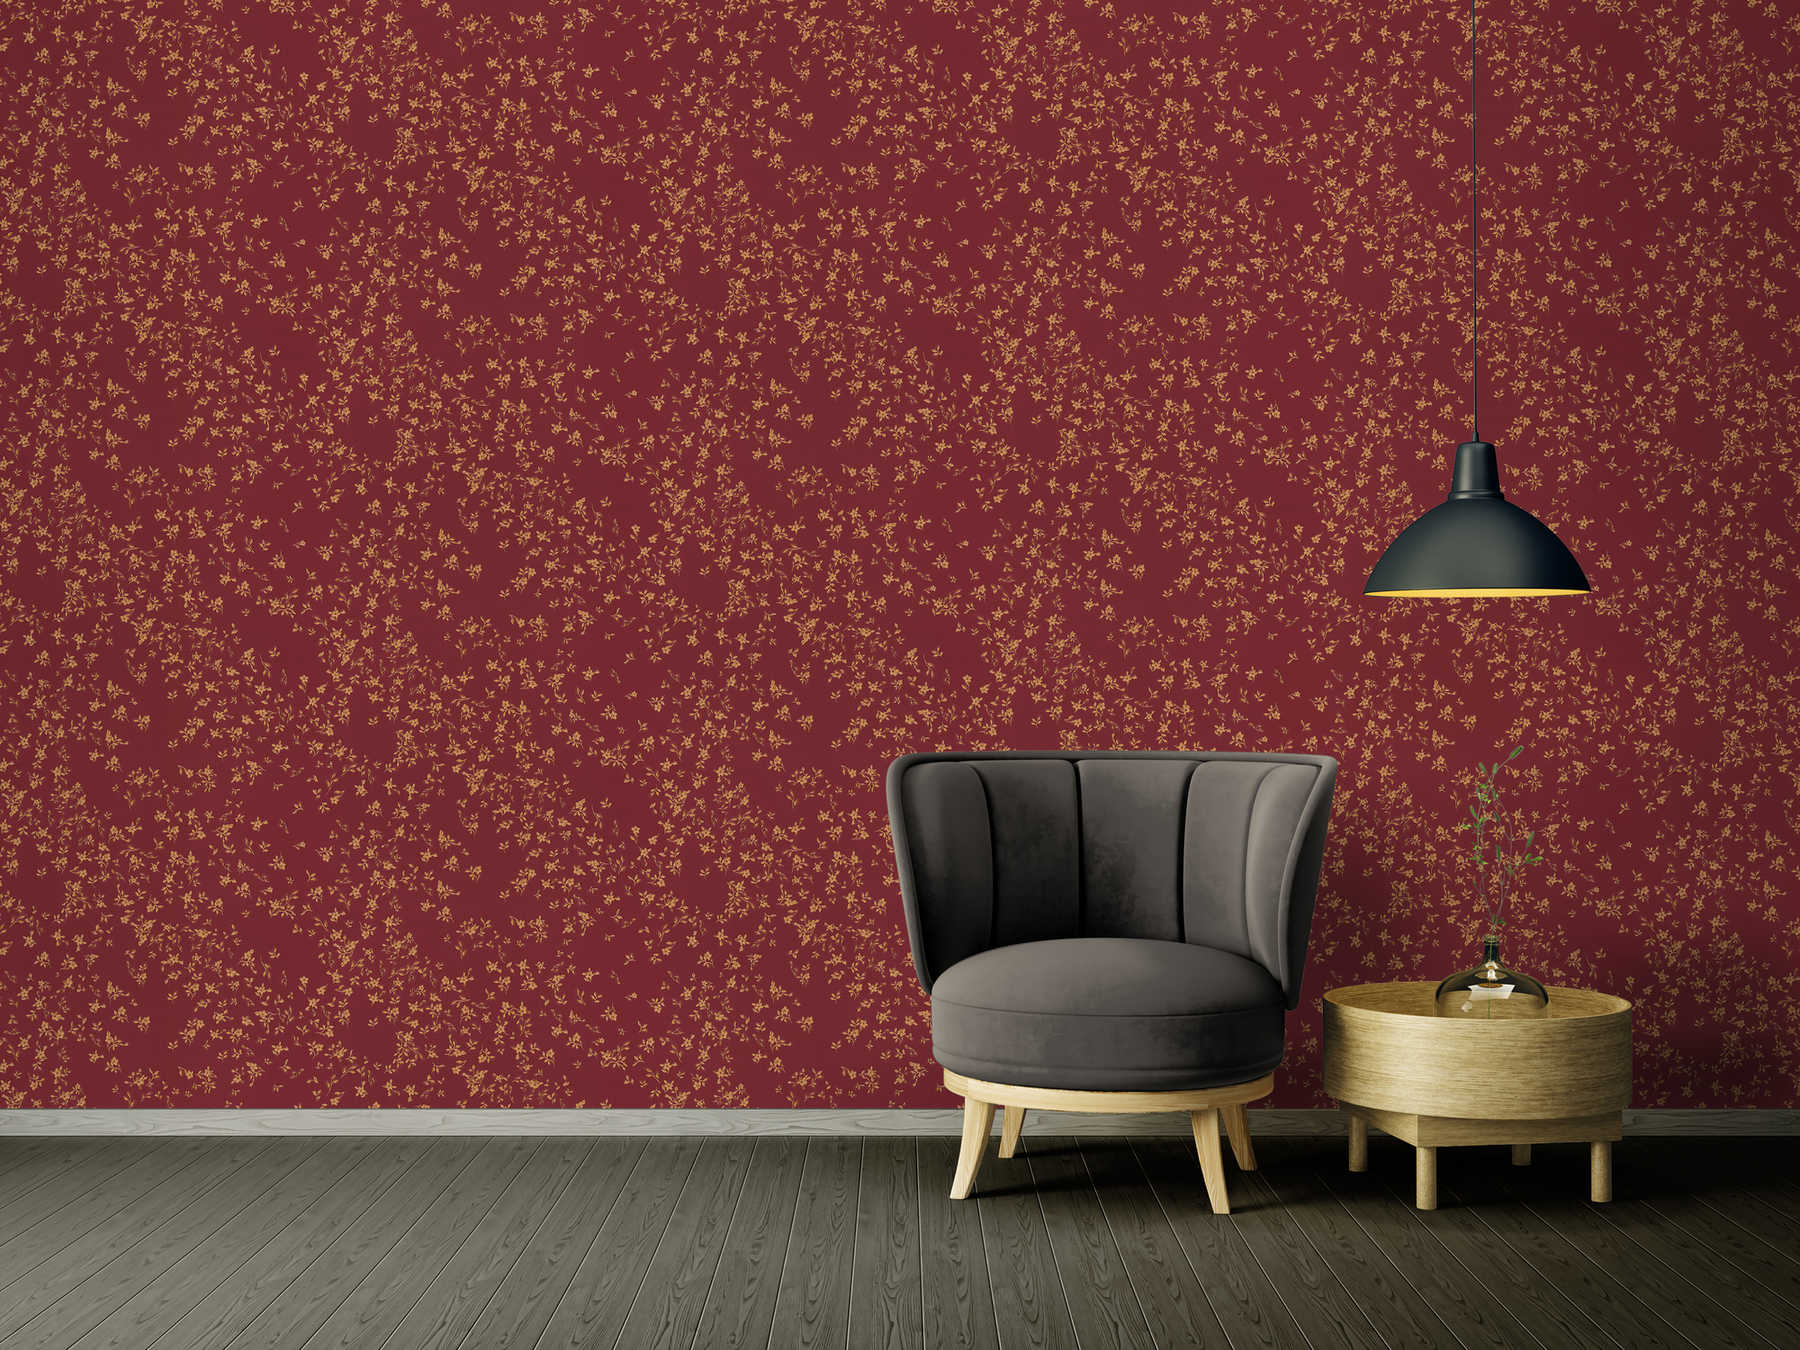             Red VERSACE wallpaper with floral pattern - red, gold, brown
        